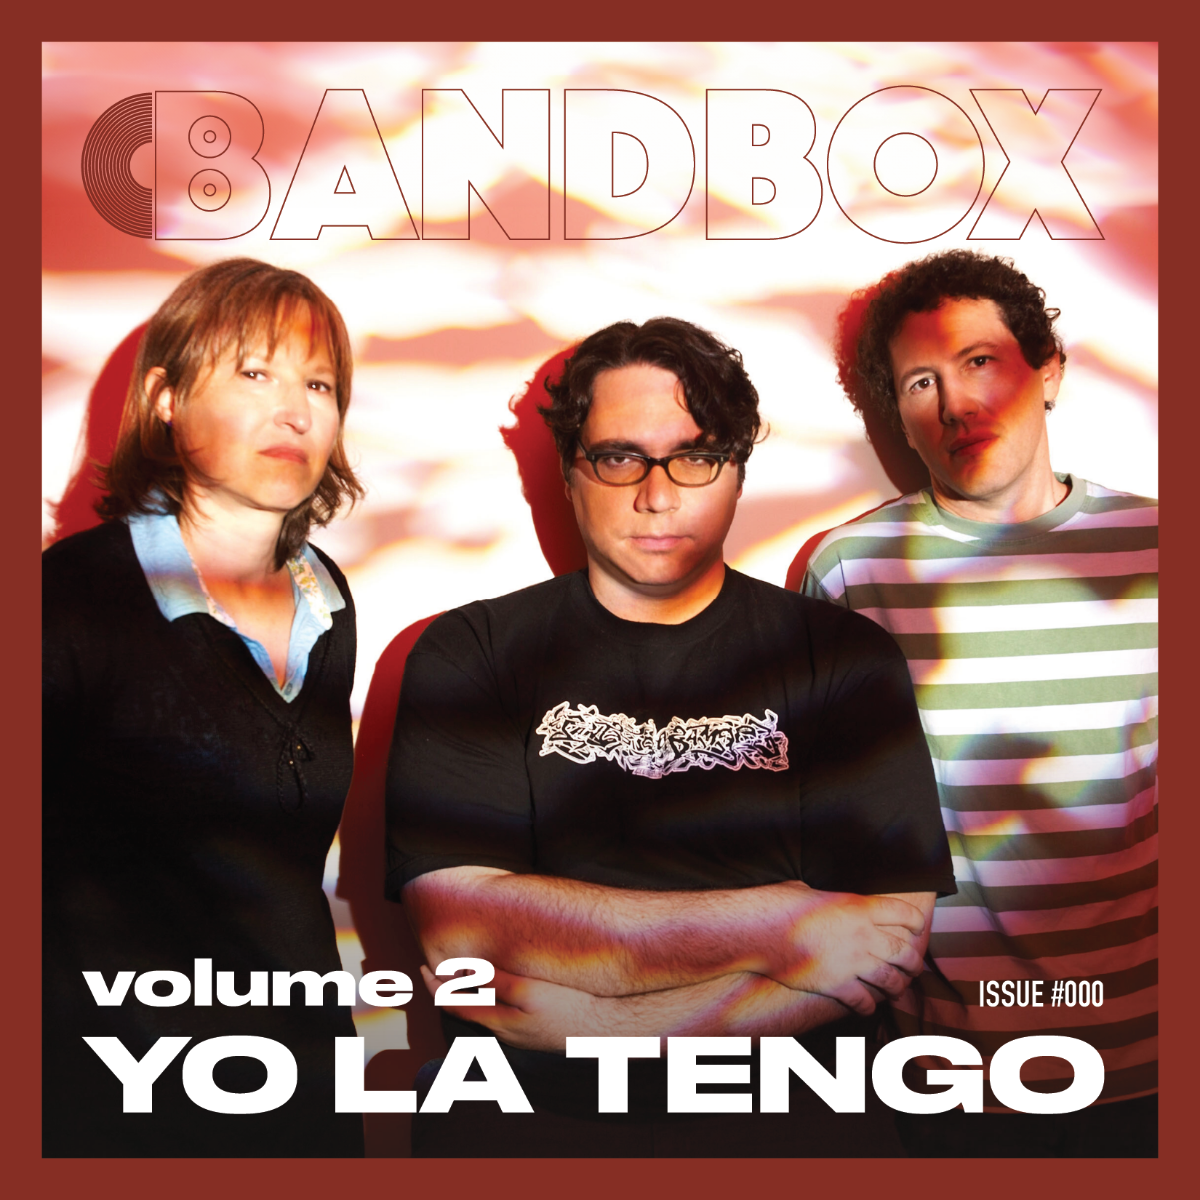 Yo La Tengo’s ‘I Am Not Afraid Of You And I Will Beat Your Ass’ is back on vinyl via BANDBOX